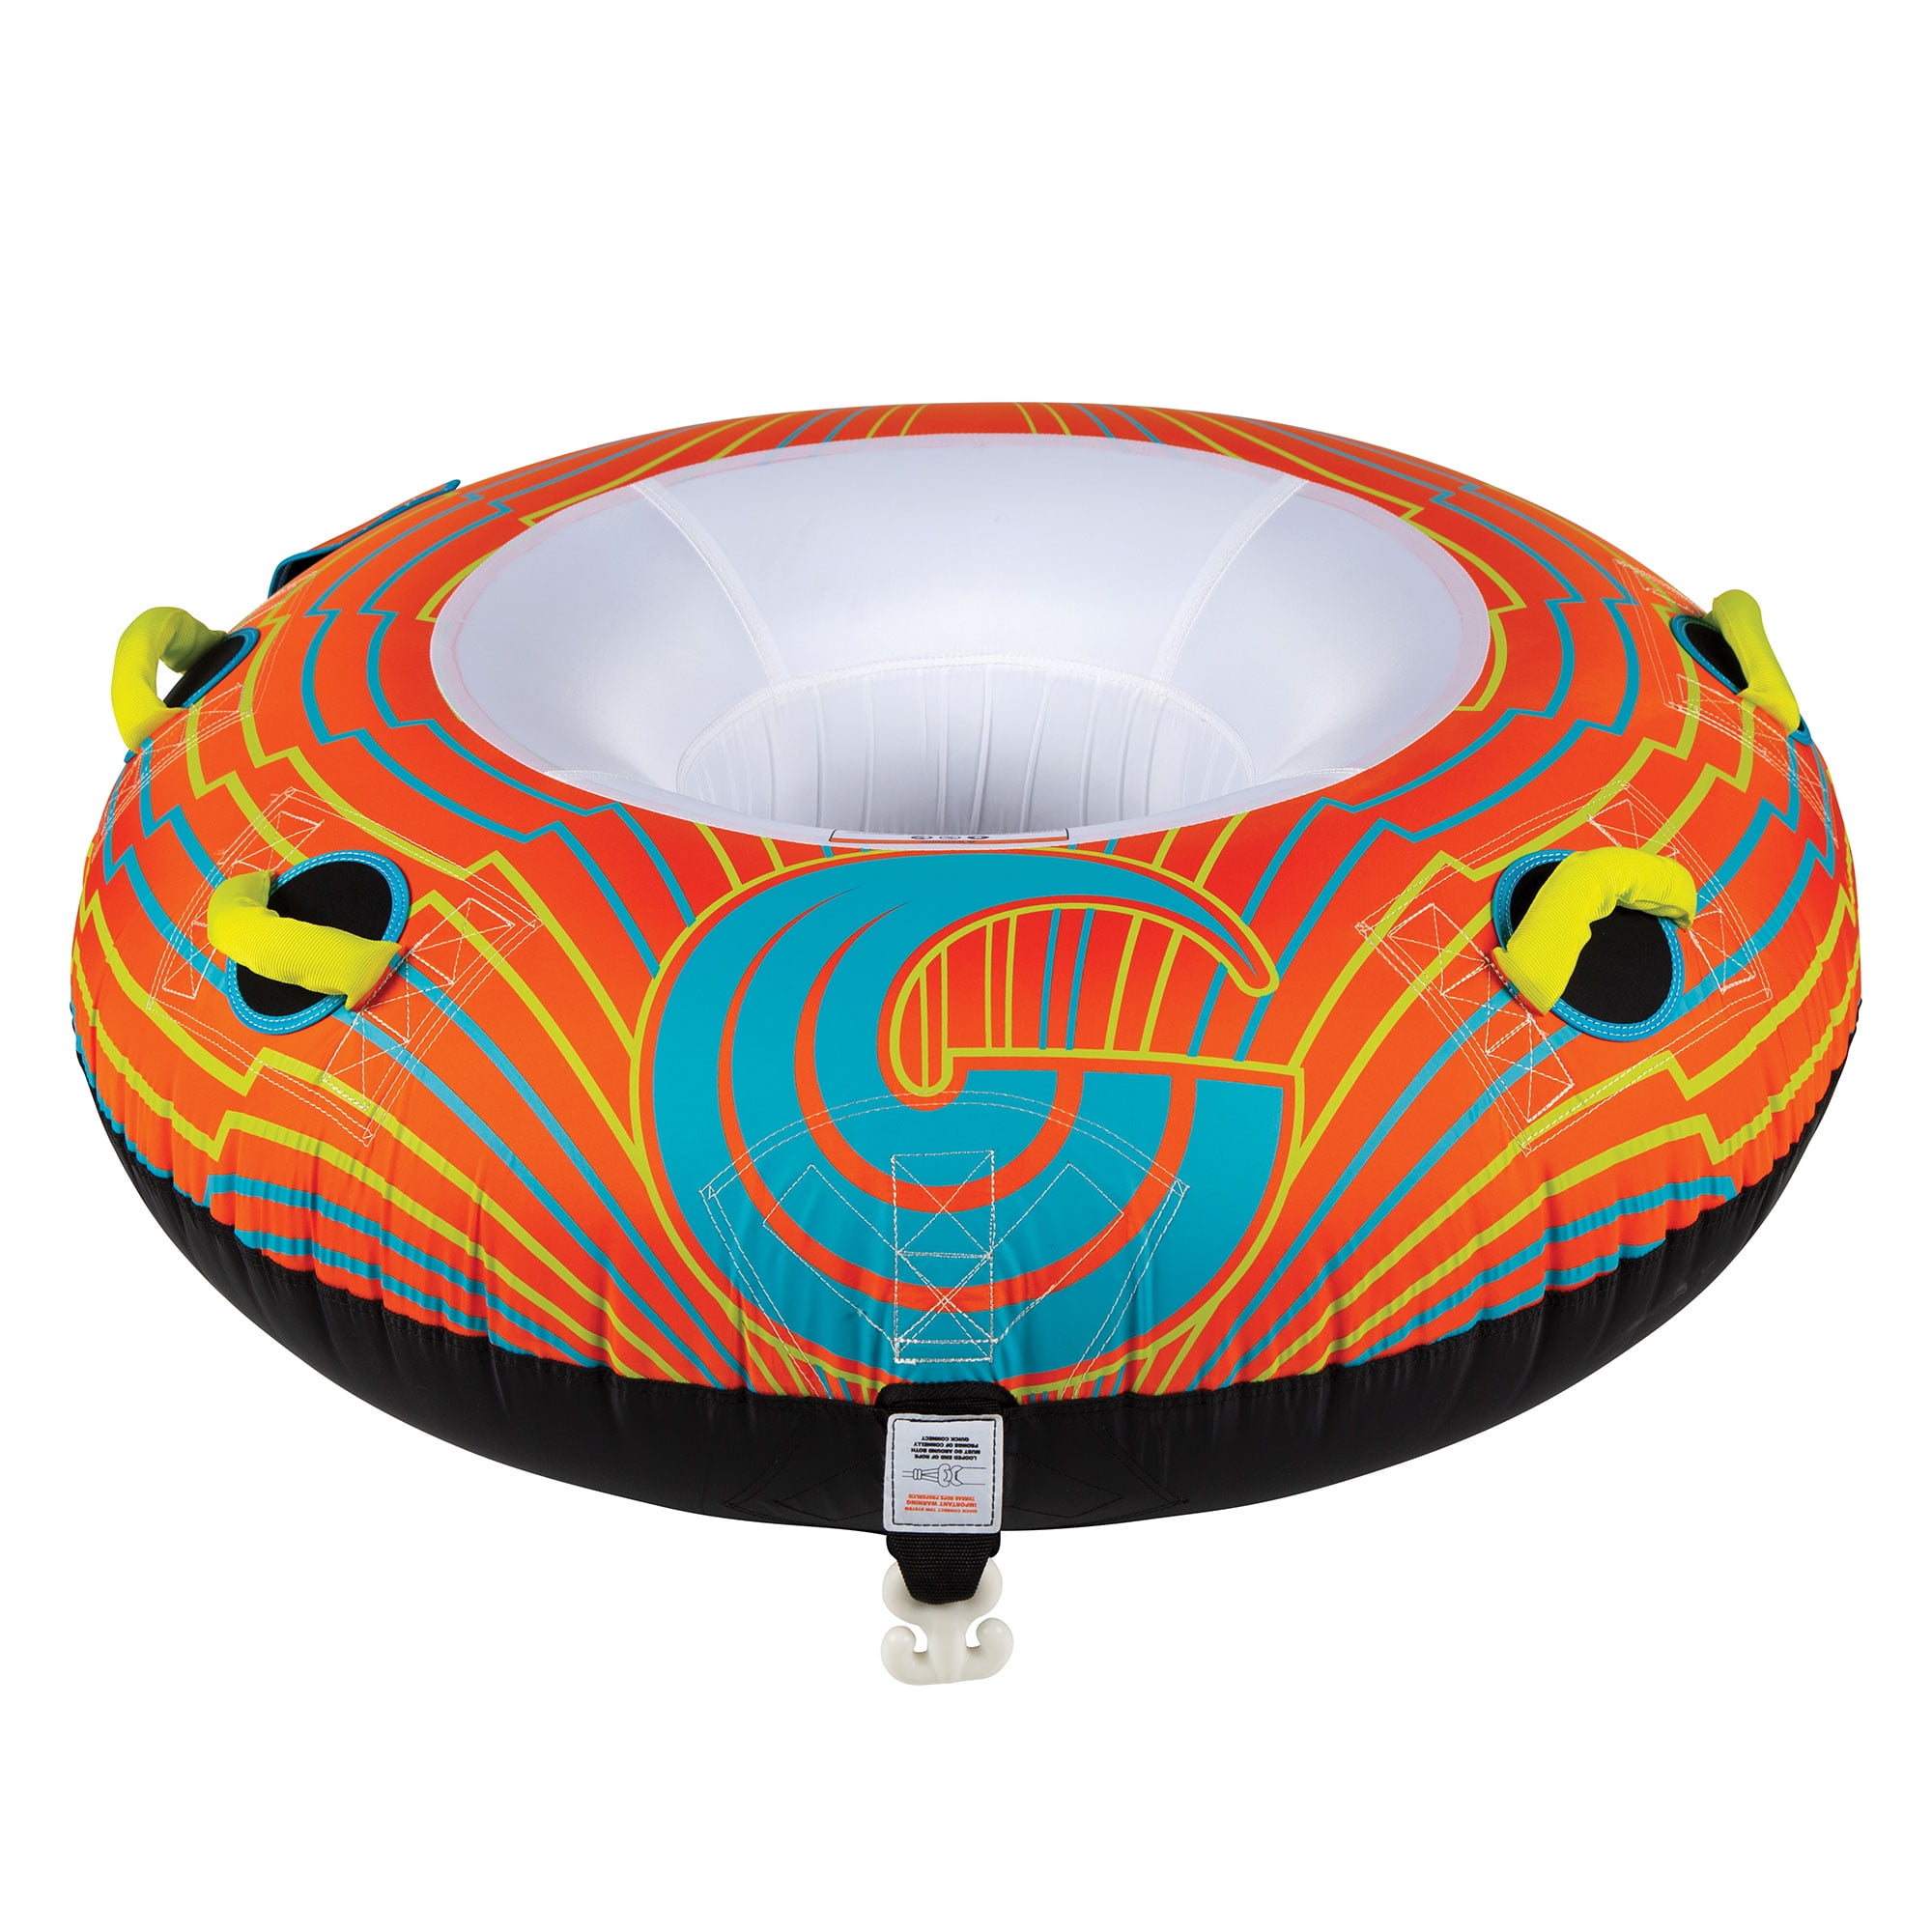 Rave Sports 02325 Mega Storm 4 Rider Inflatable Water Float Towable Boat  Tube 